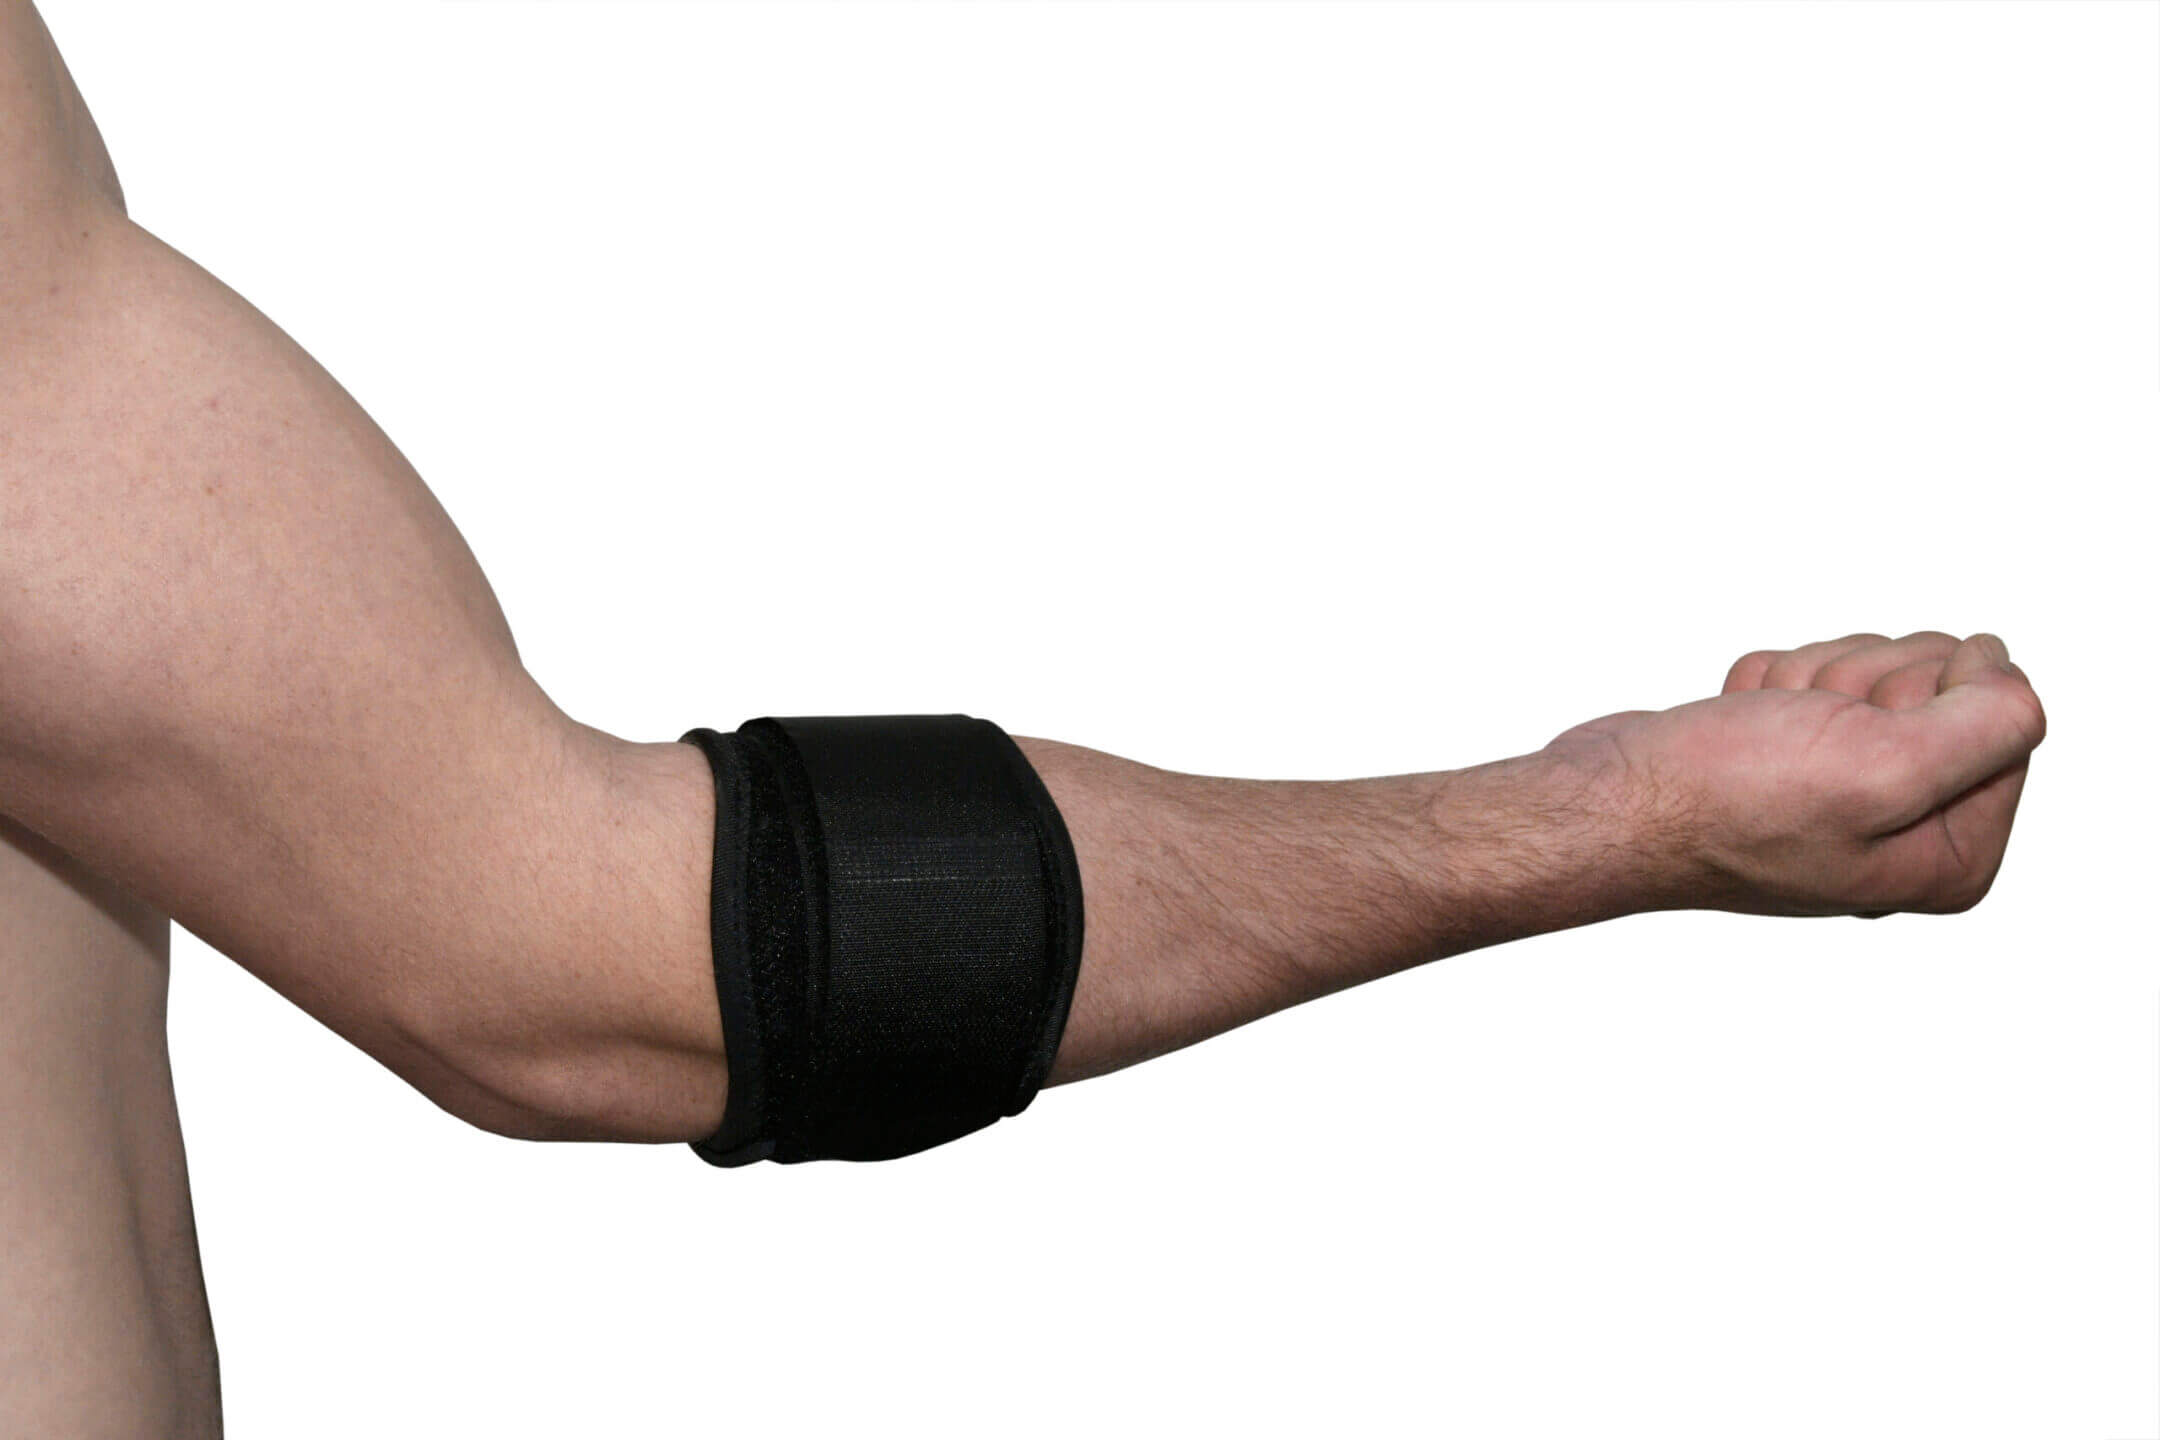 Tennis Elbow Brace with Silicon Pad